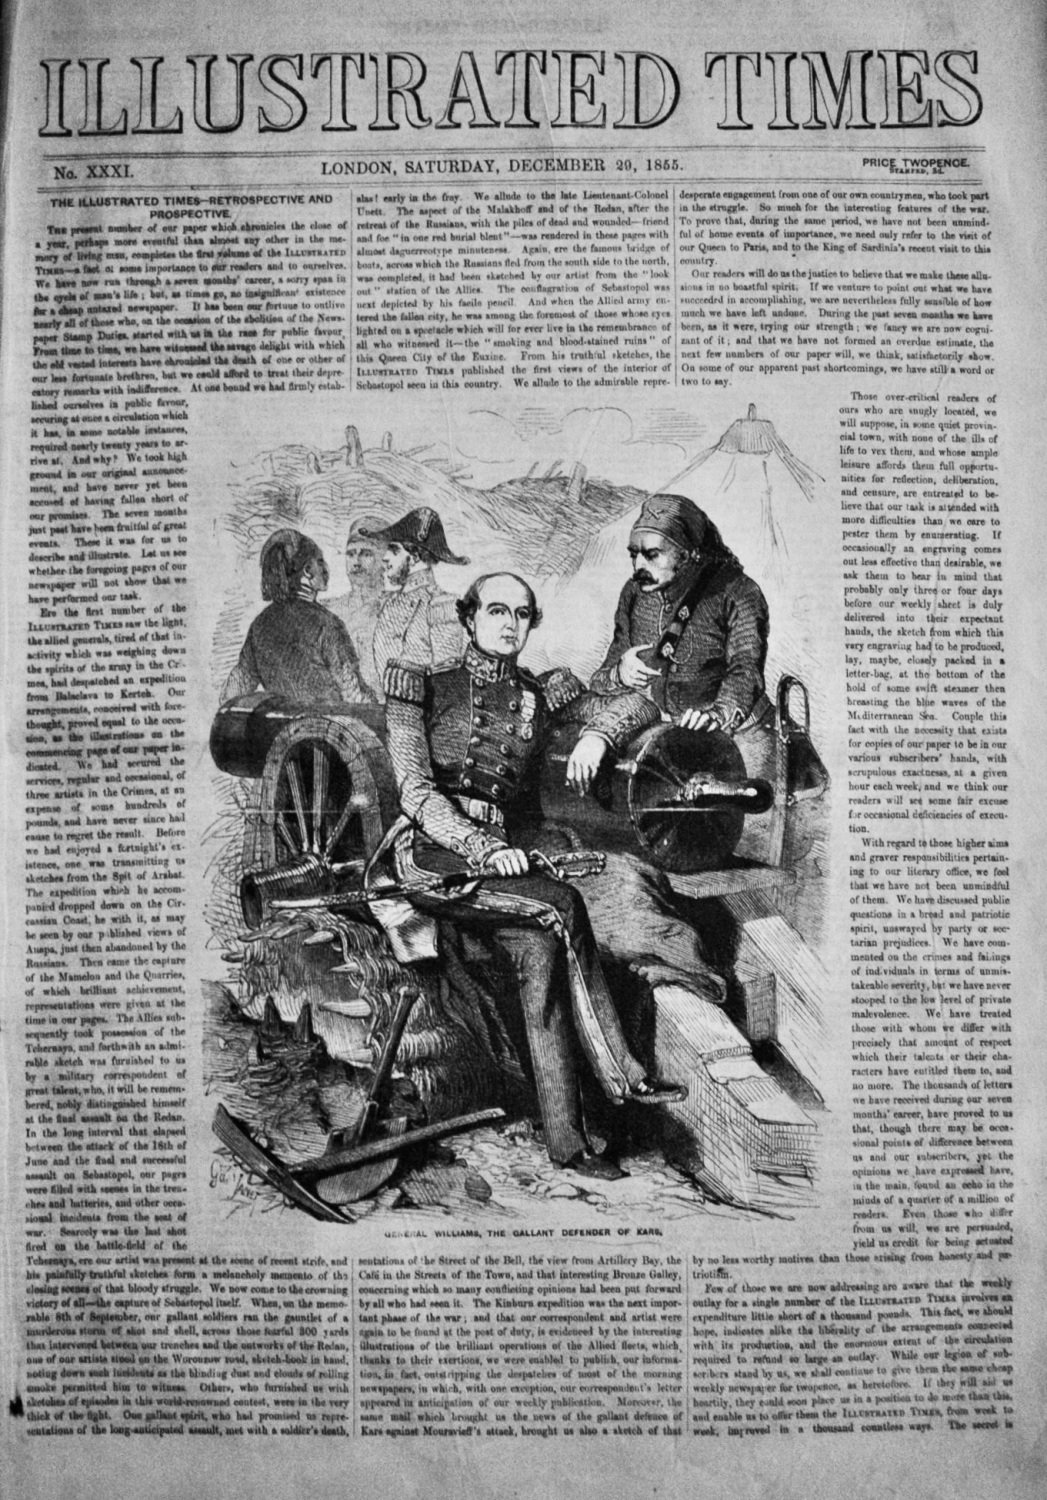 Illustrated Times, December 29th, 1855.